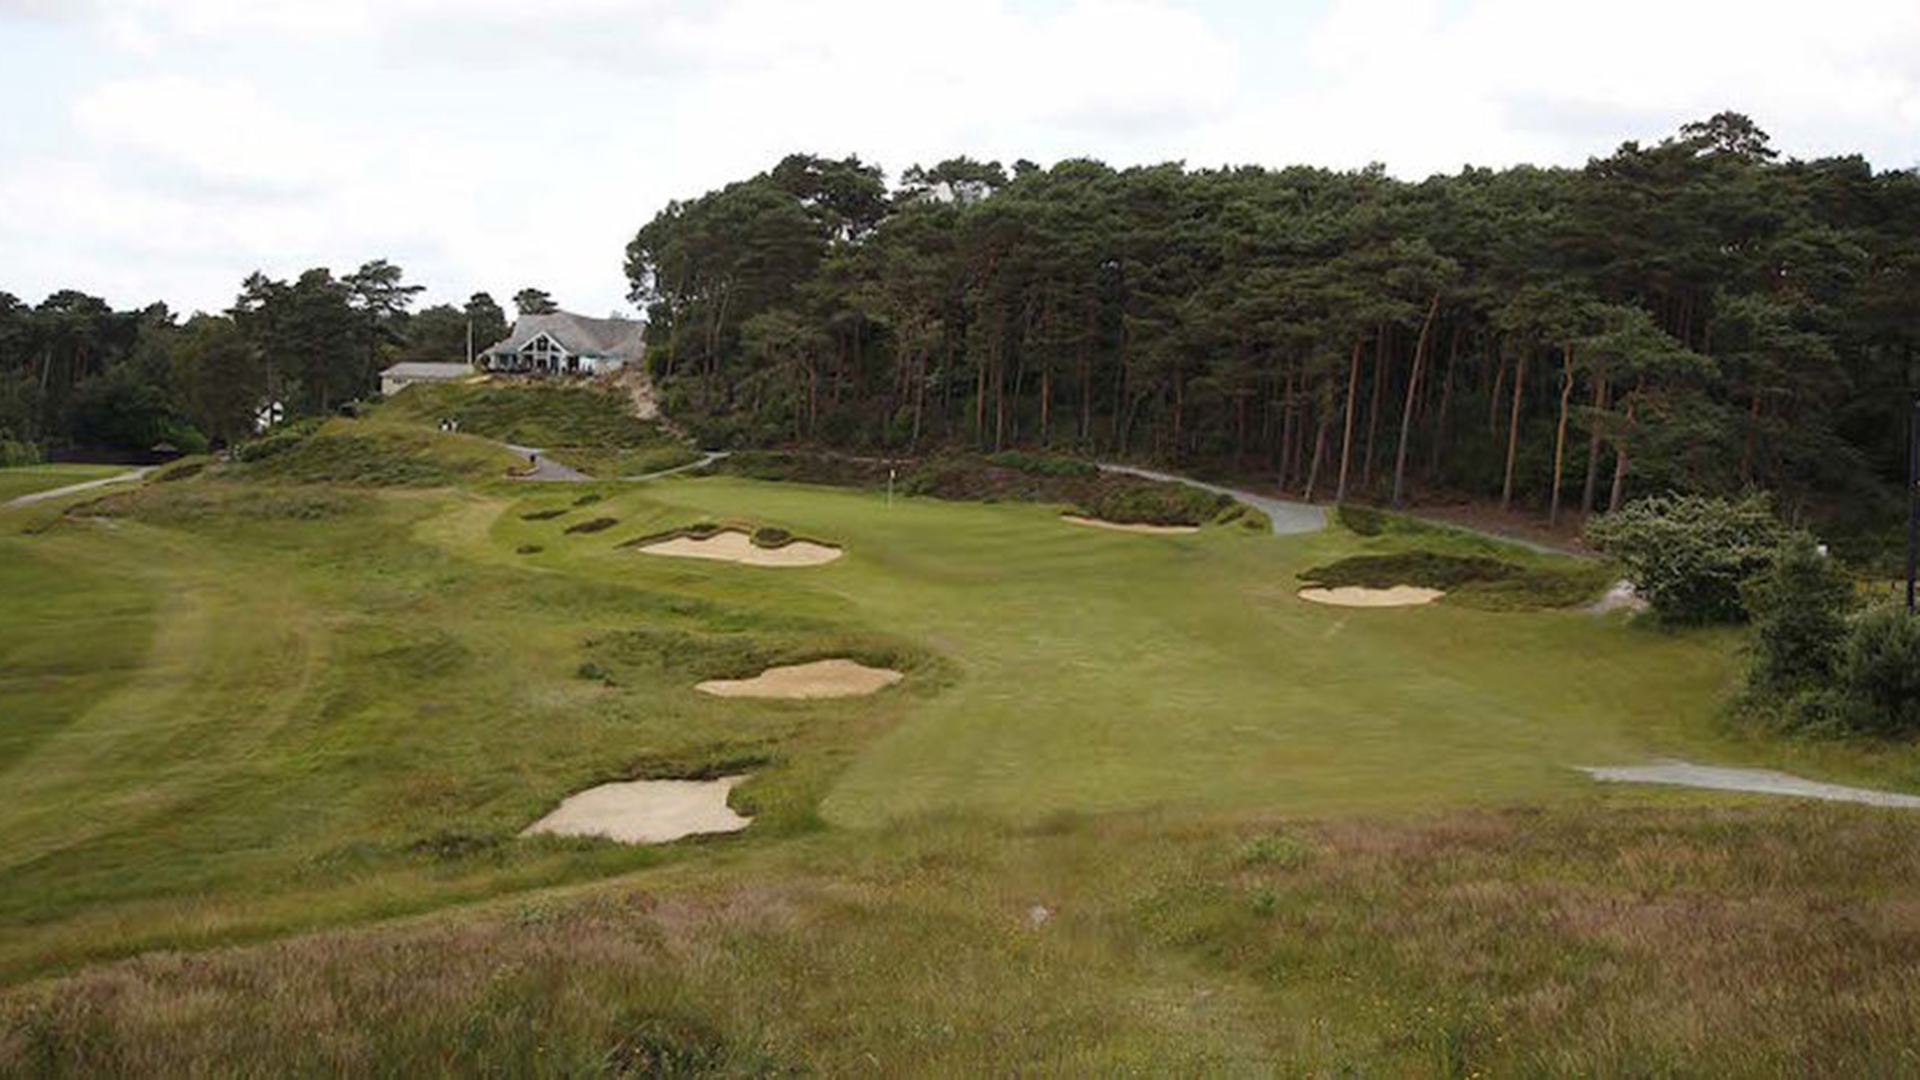 The 18th Hole at Parkstone